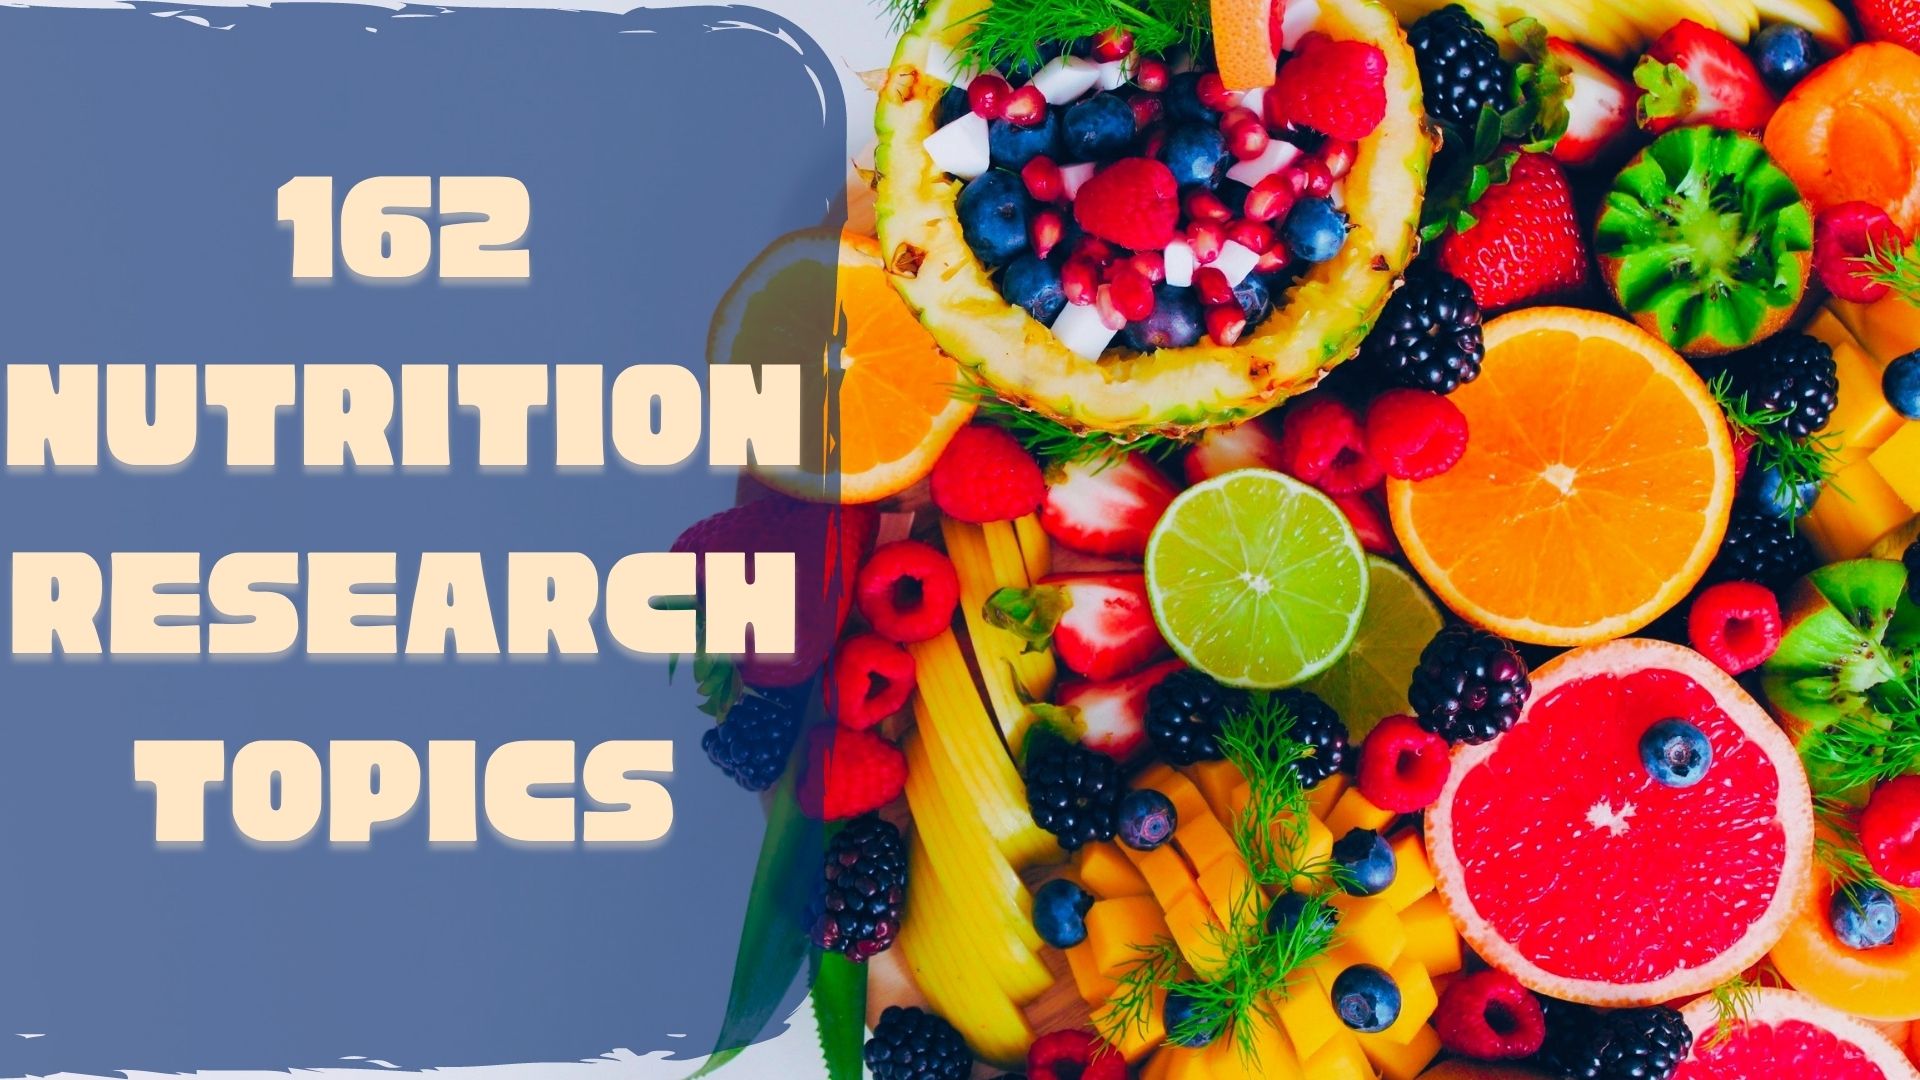 162 Nutrition Research Topics